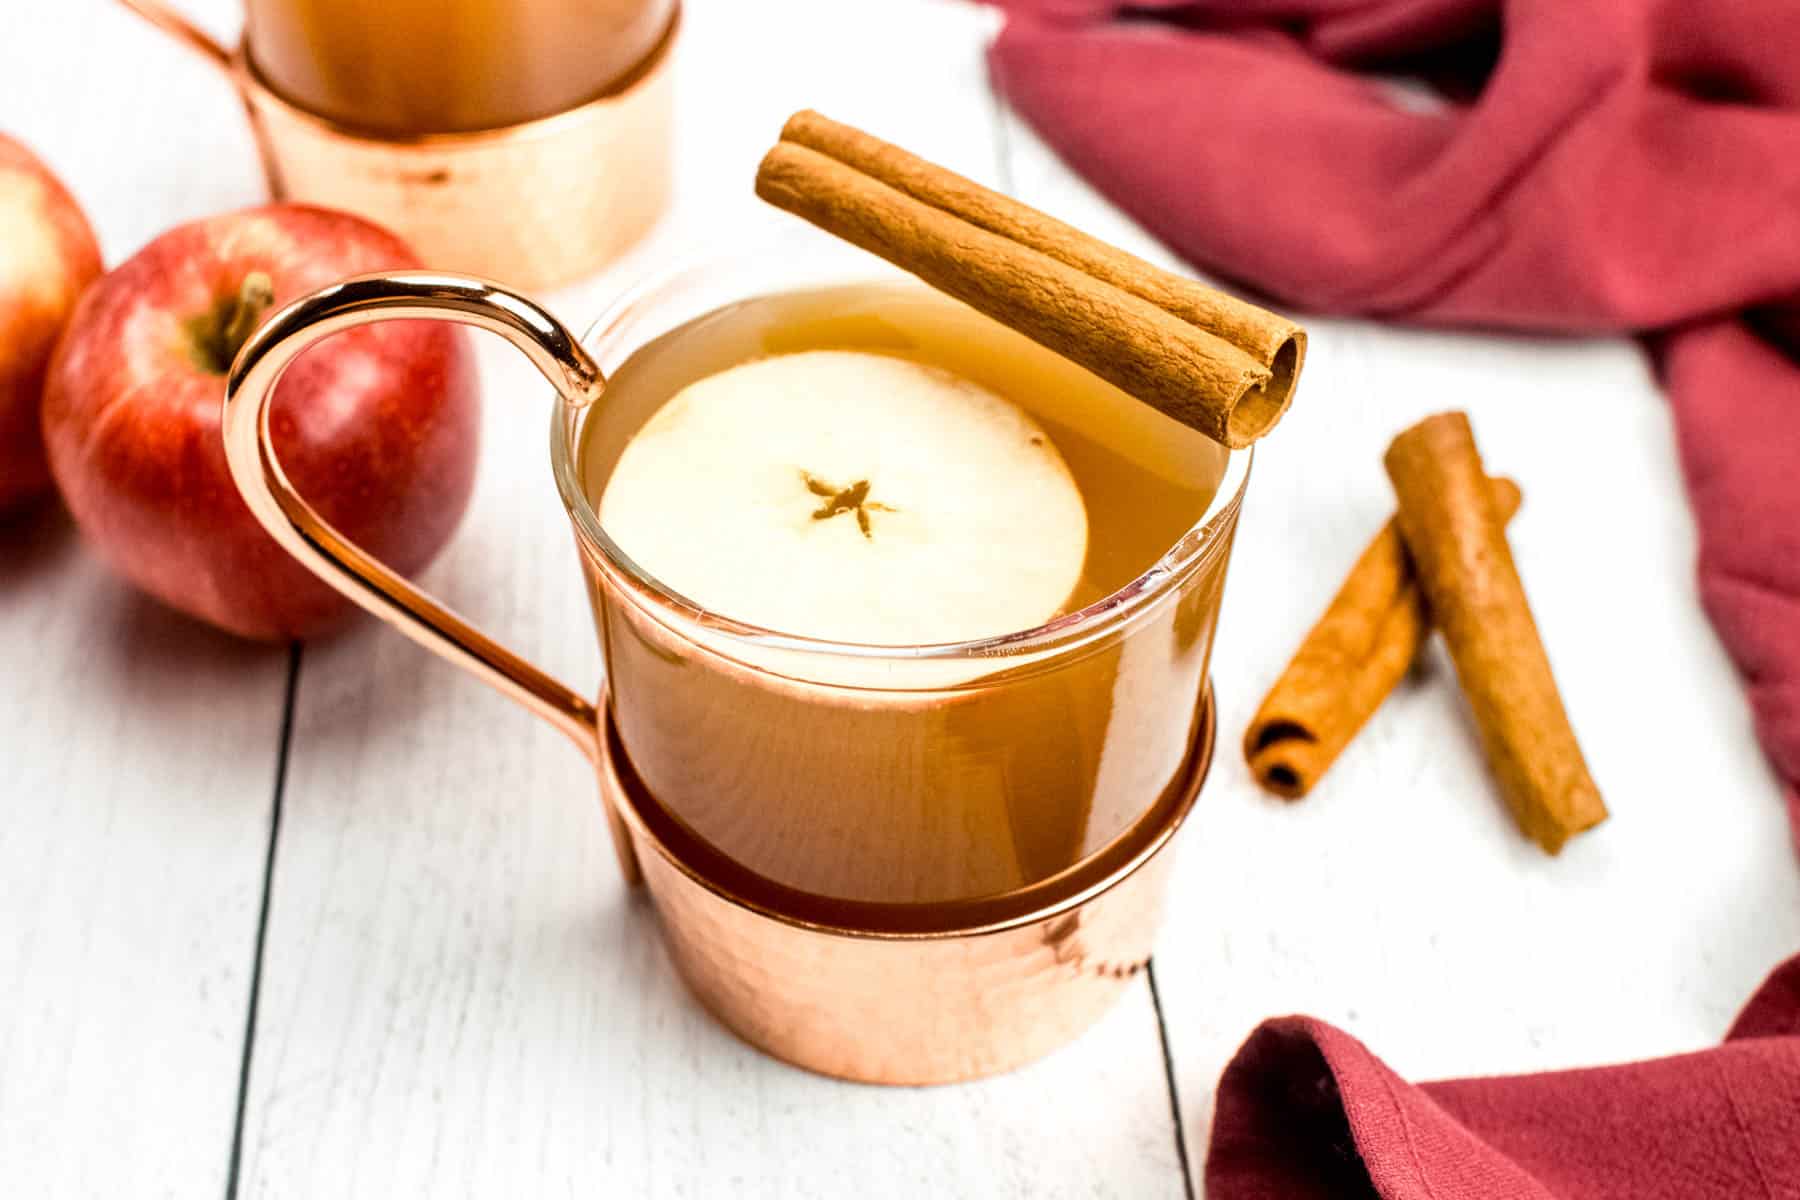 A cup of apple cider with cinnamon sticks and apples.